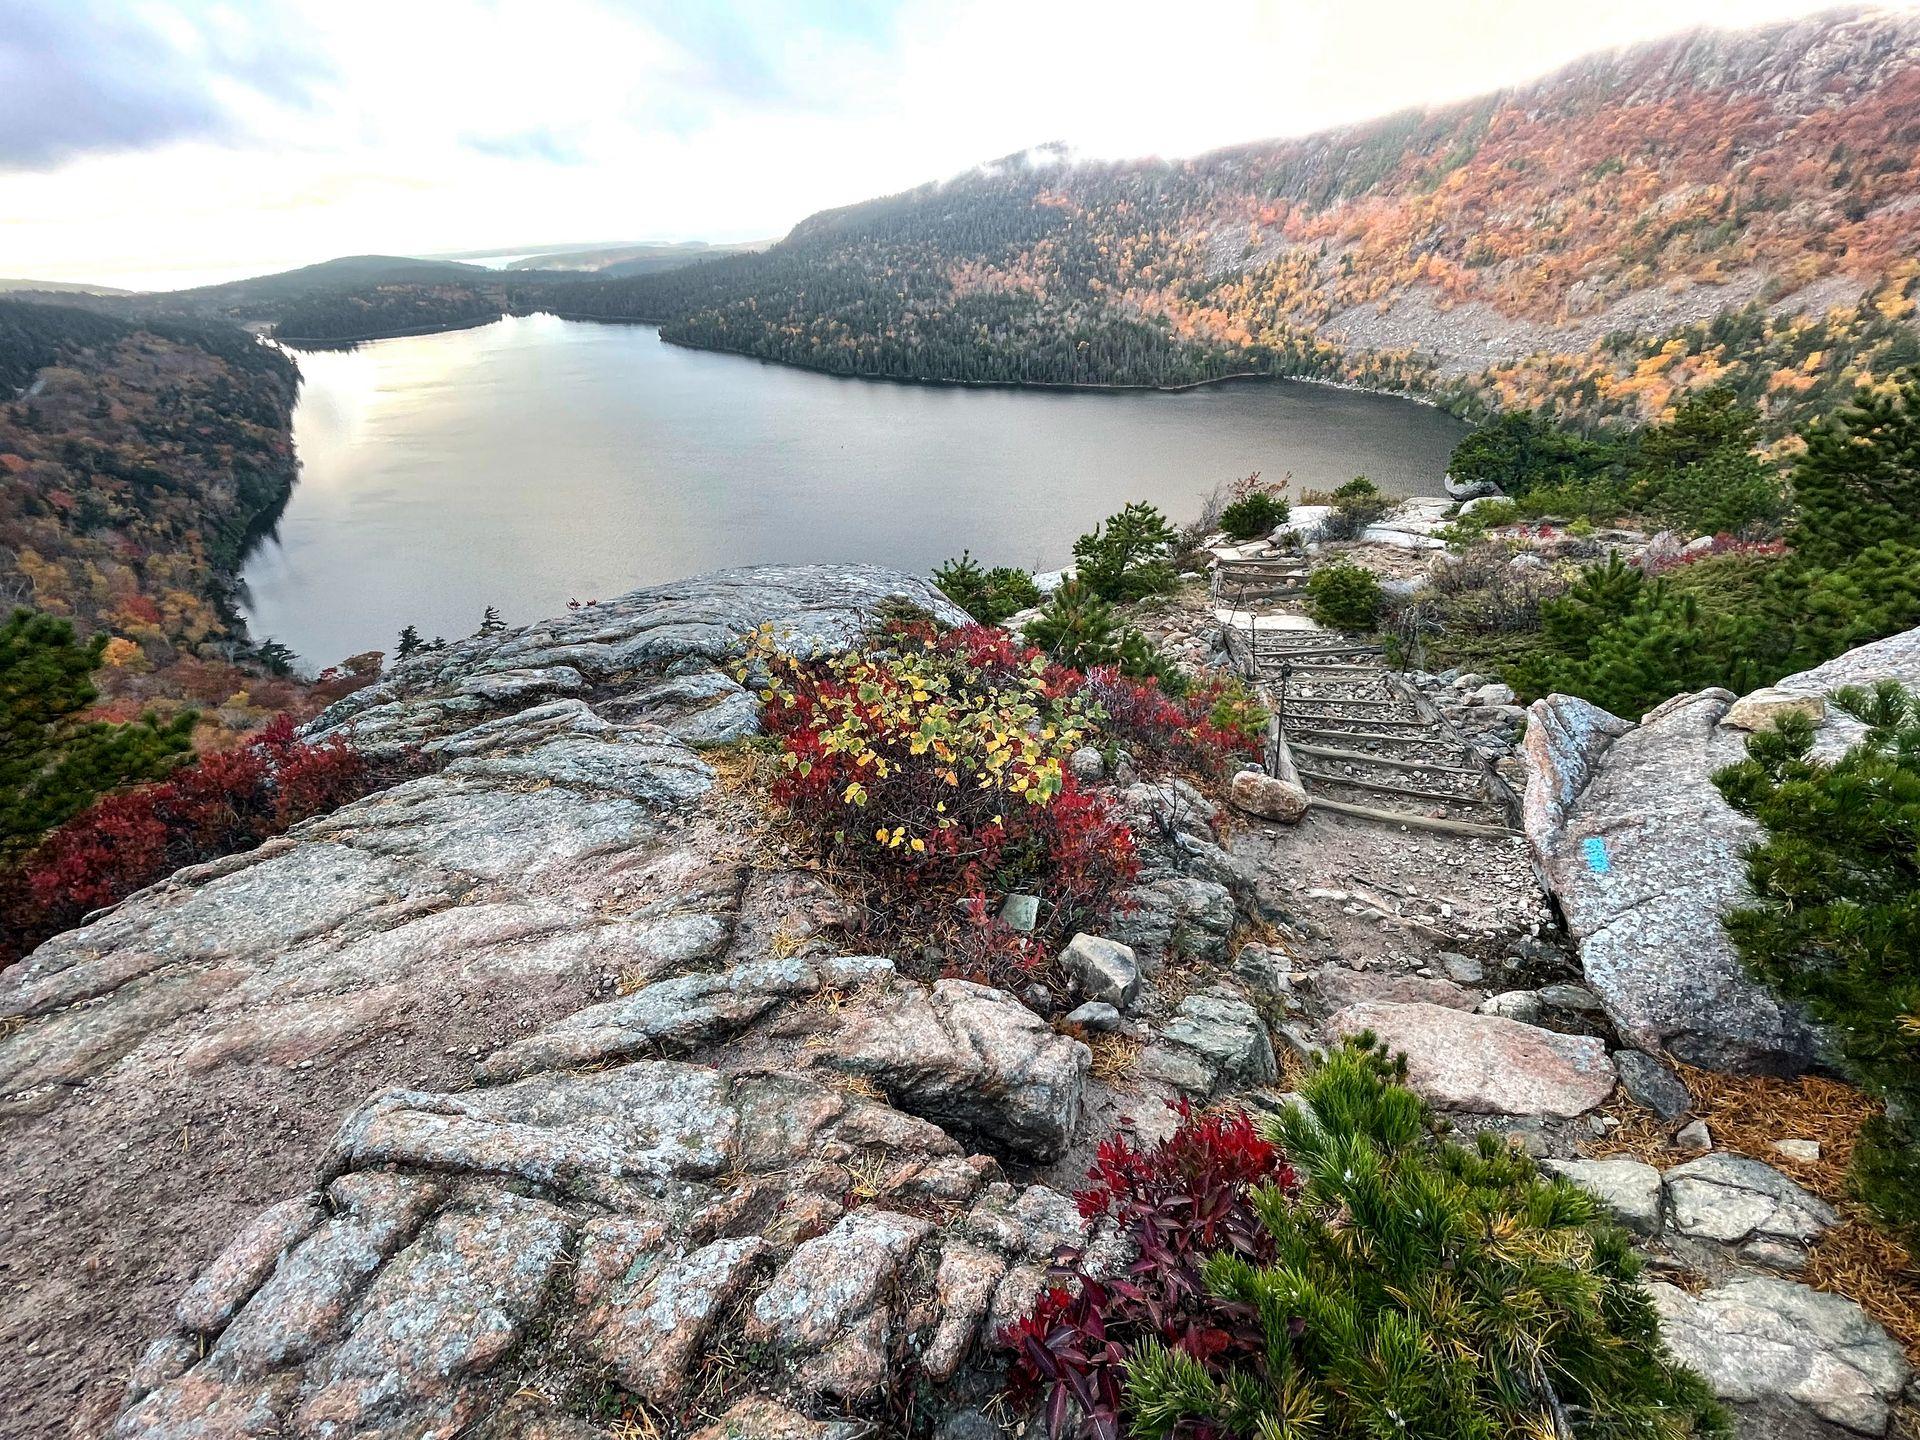 Looking down at Jordan Pond from the top of the South Bubble. The surrounding mountains are covered in fall colors.